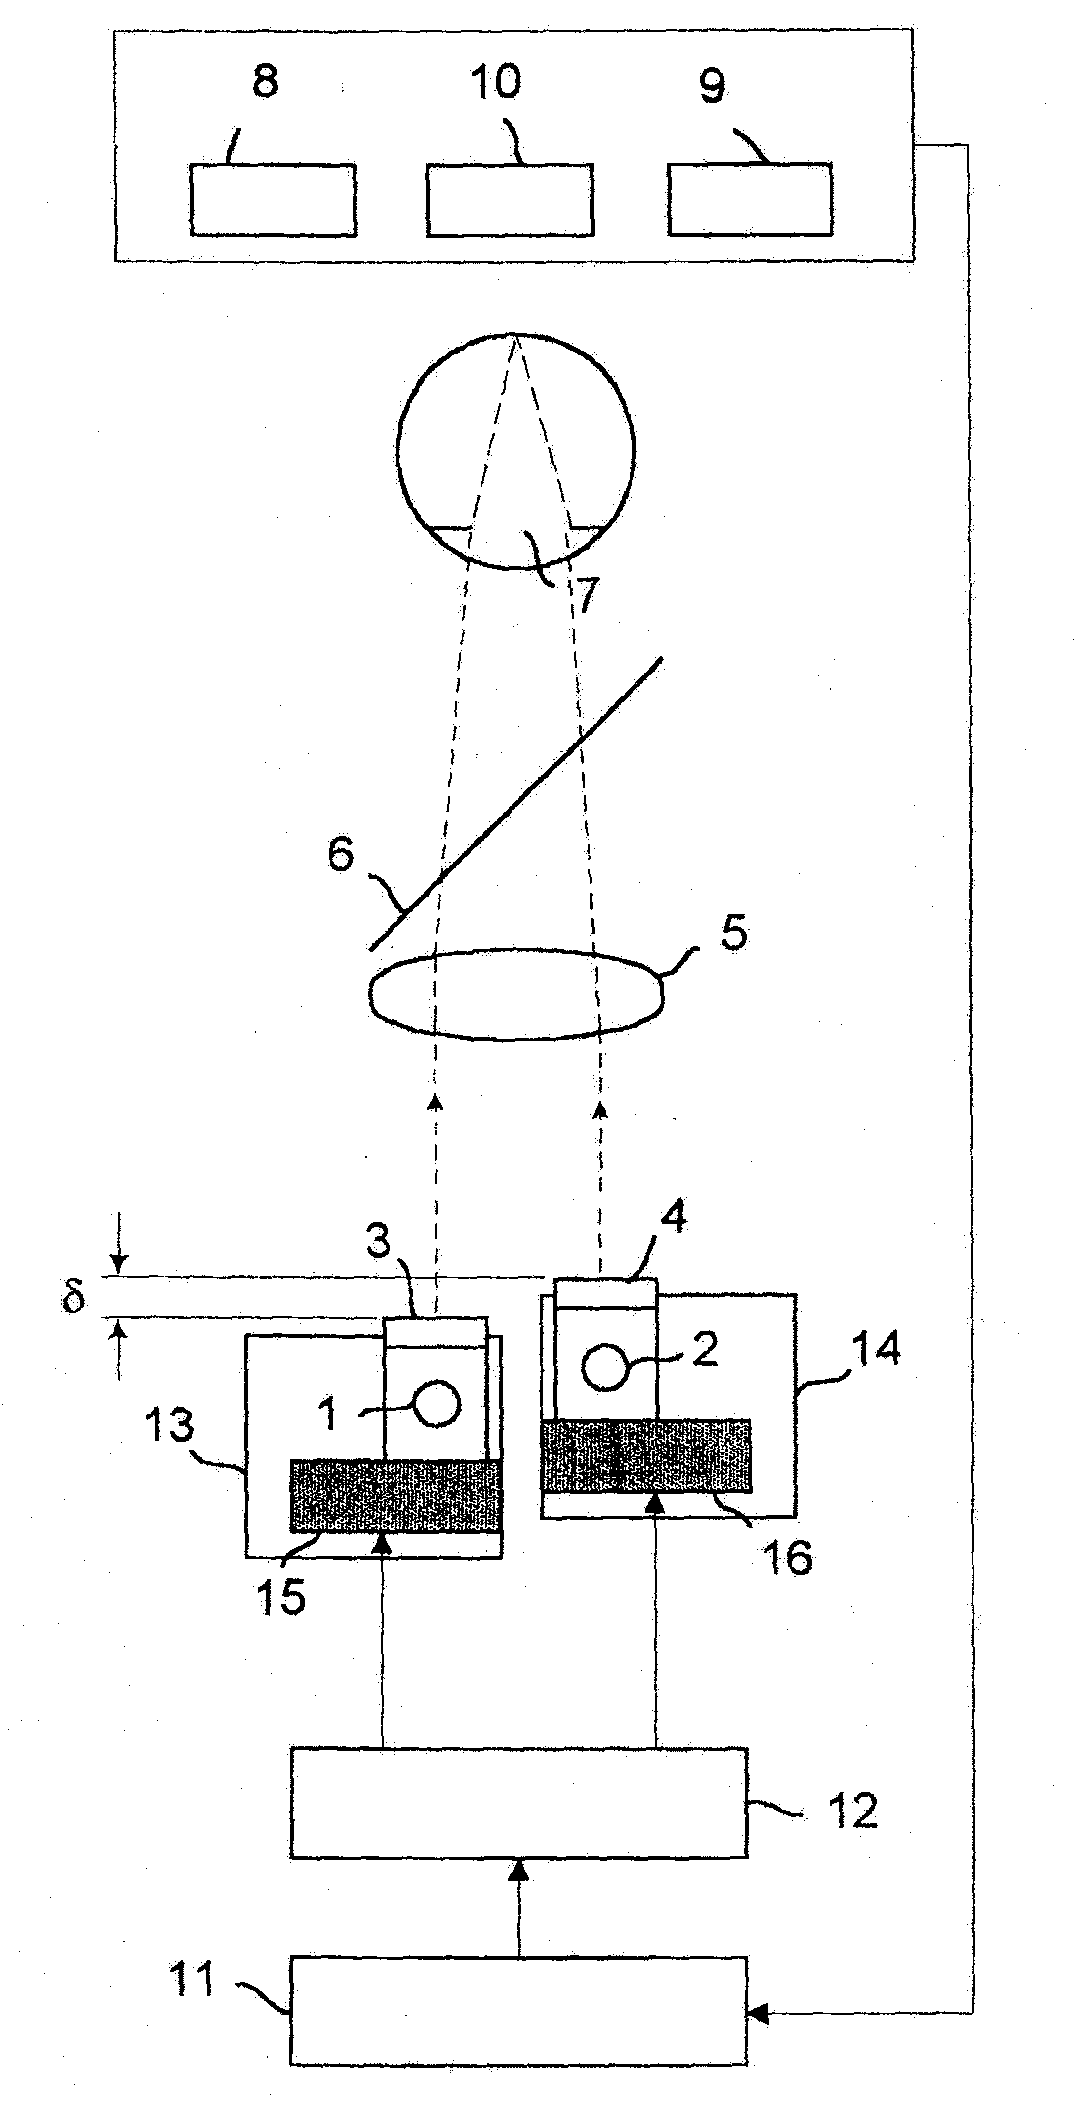 Apparatus and method for subjective determination of the refractive error of the eye